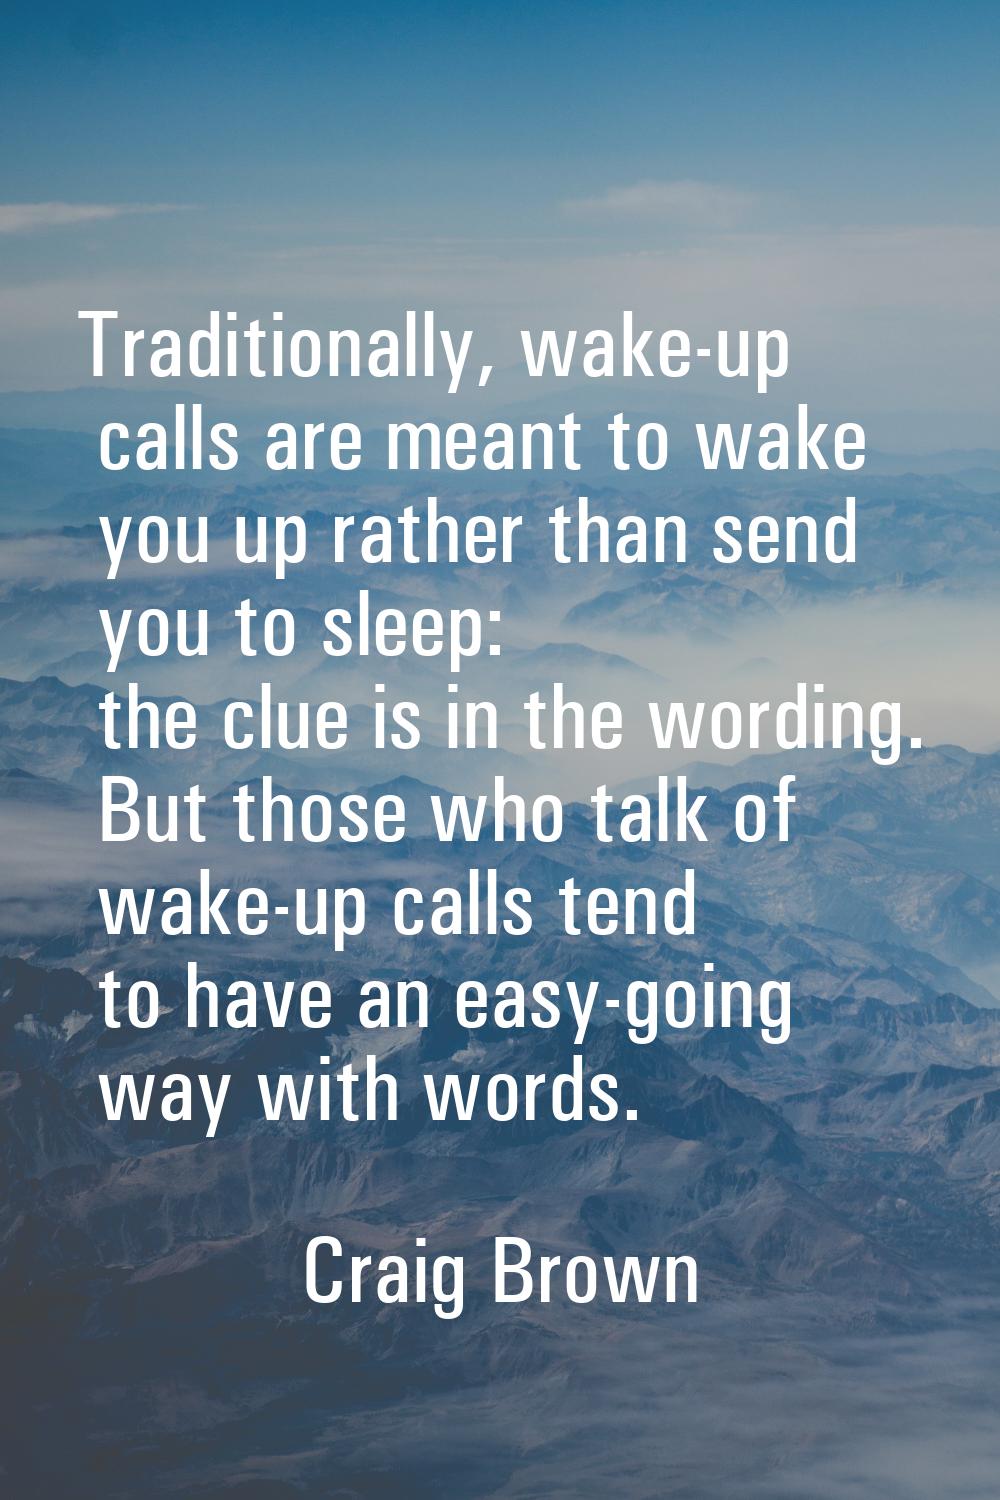 Traditionally, wake-up calls are meant to wake you up rather than send you to sleep: the clue is in